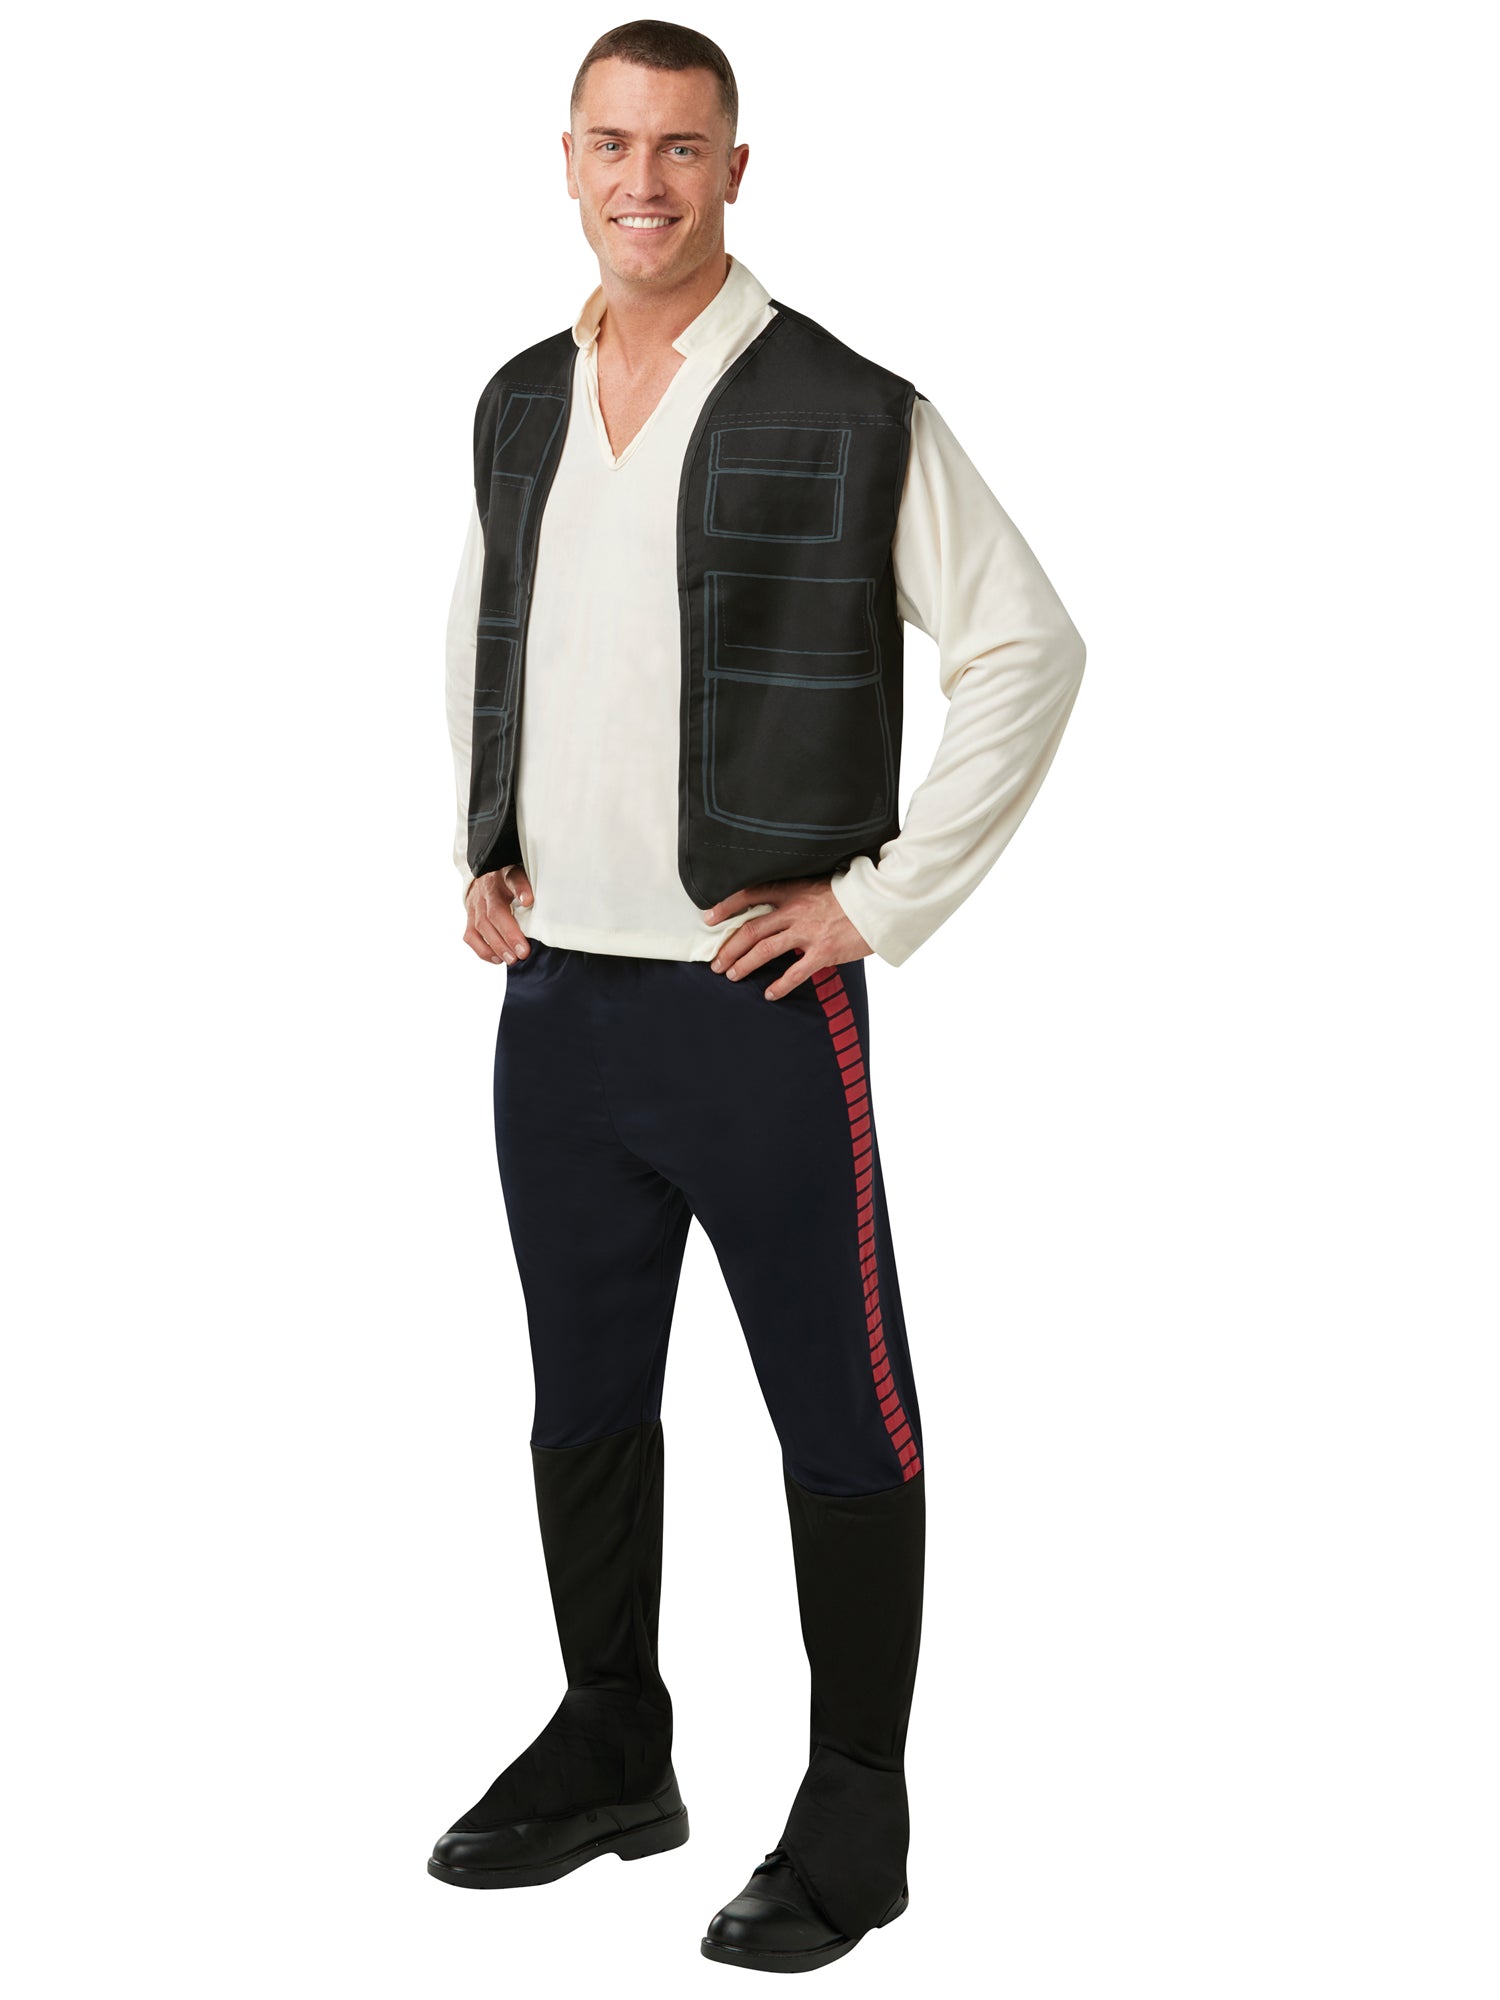 Han Solo, A New Hope, Episode IV, A New Hope, Multi, Star Wars, Adult Costume, Standard, Front